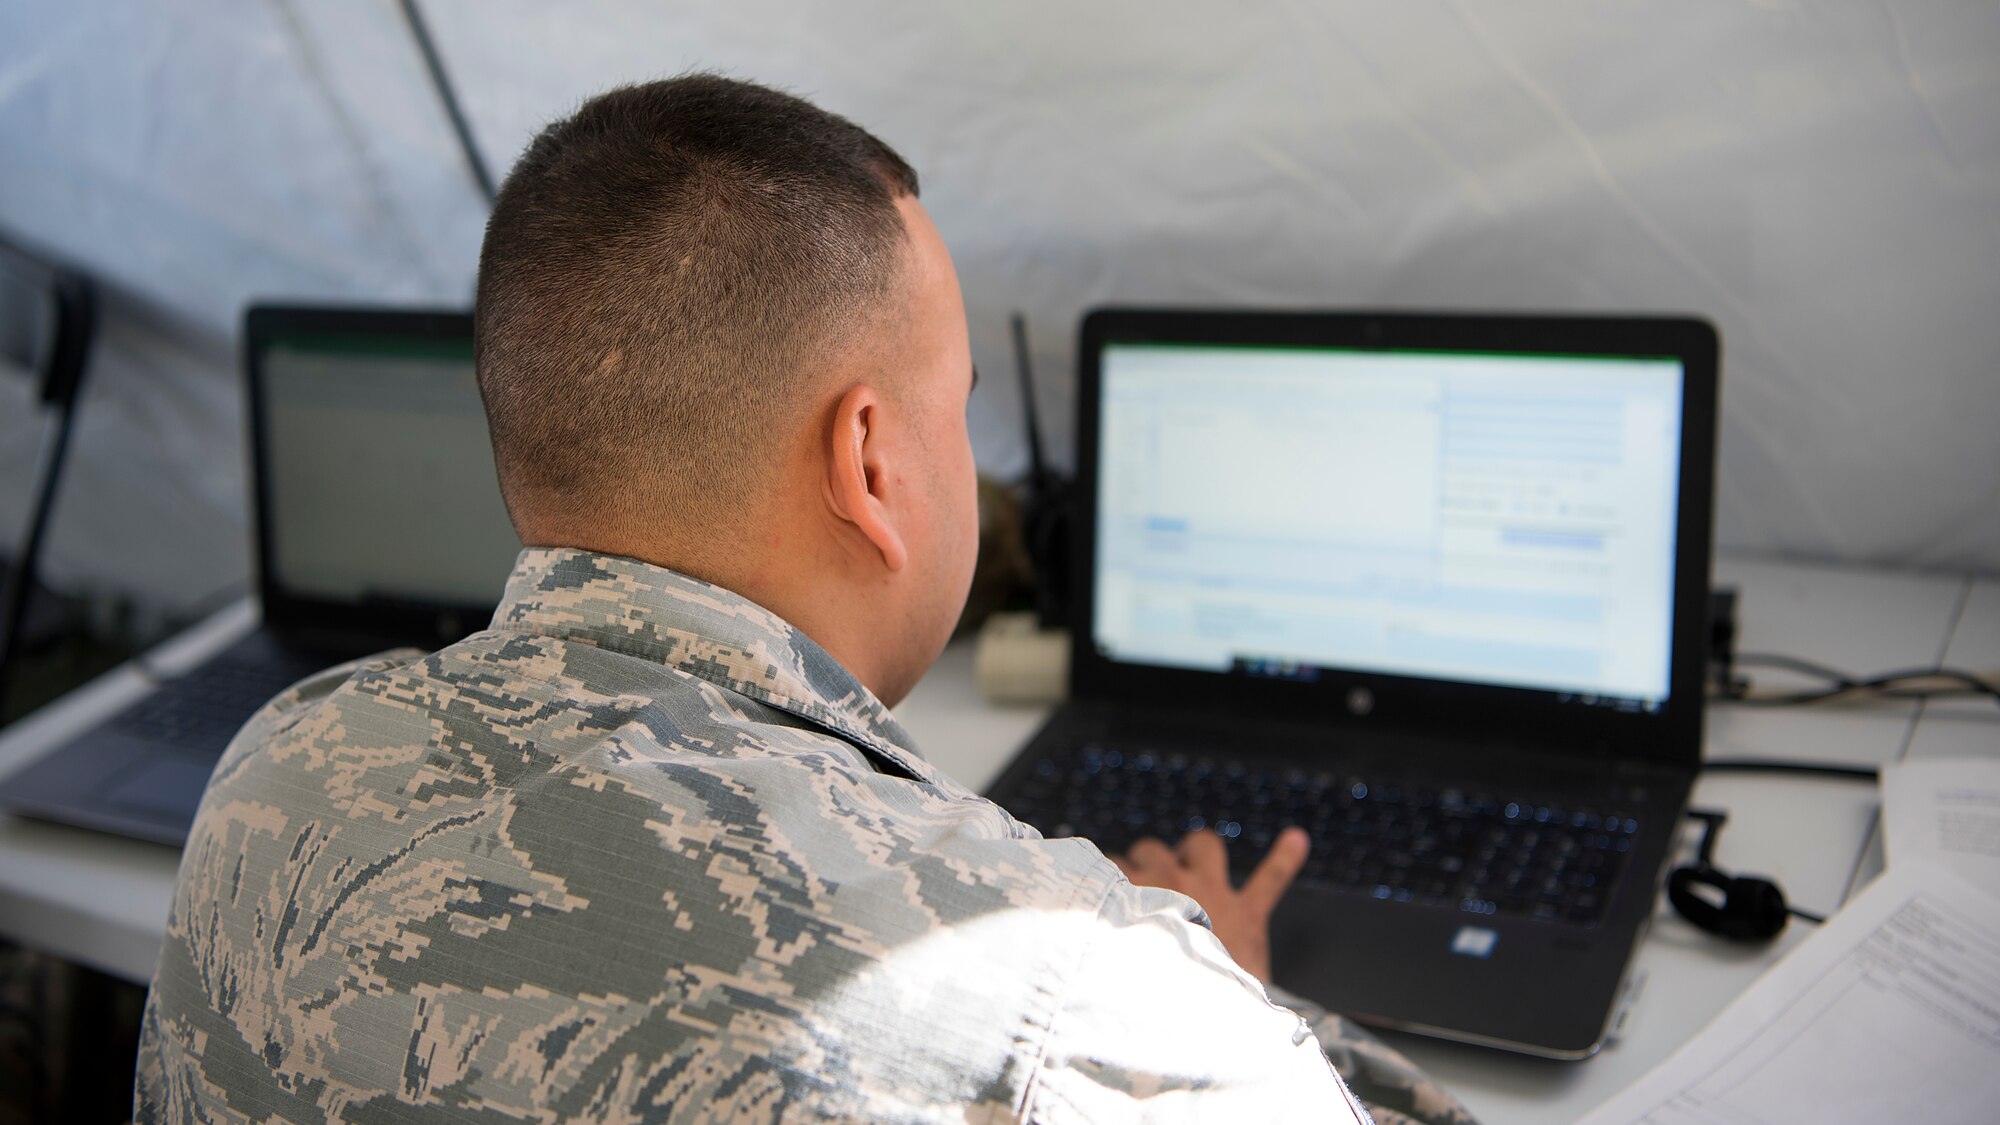 U.S. Air Force Staff Sgt. Felix Castro, a contract specialist with the 6th Contracting Squadron, digitally signs a simulated contract during the Operation Open Horizon training exercise April 16, 2019, at MacDill Air Force Base, Fla. The 6th Contracting Squadron partnered with the 6th Comptroller Squadron to expose Airmen to the unique duty requirements of providing contracting and pay agent support in a deployed environment.